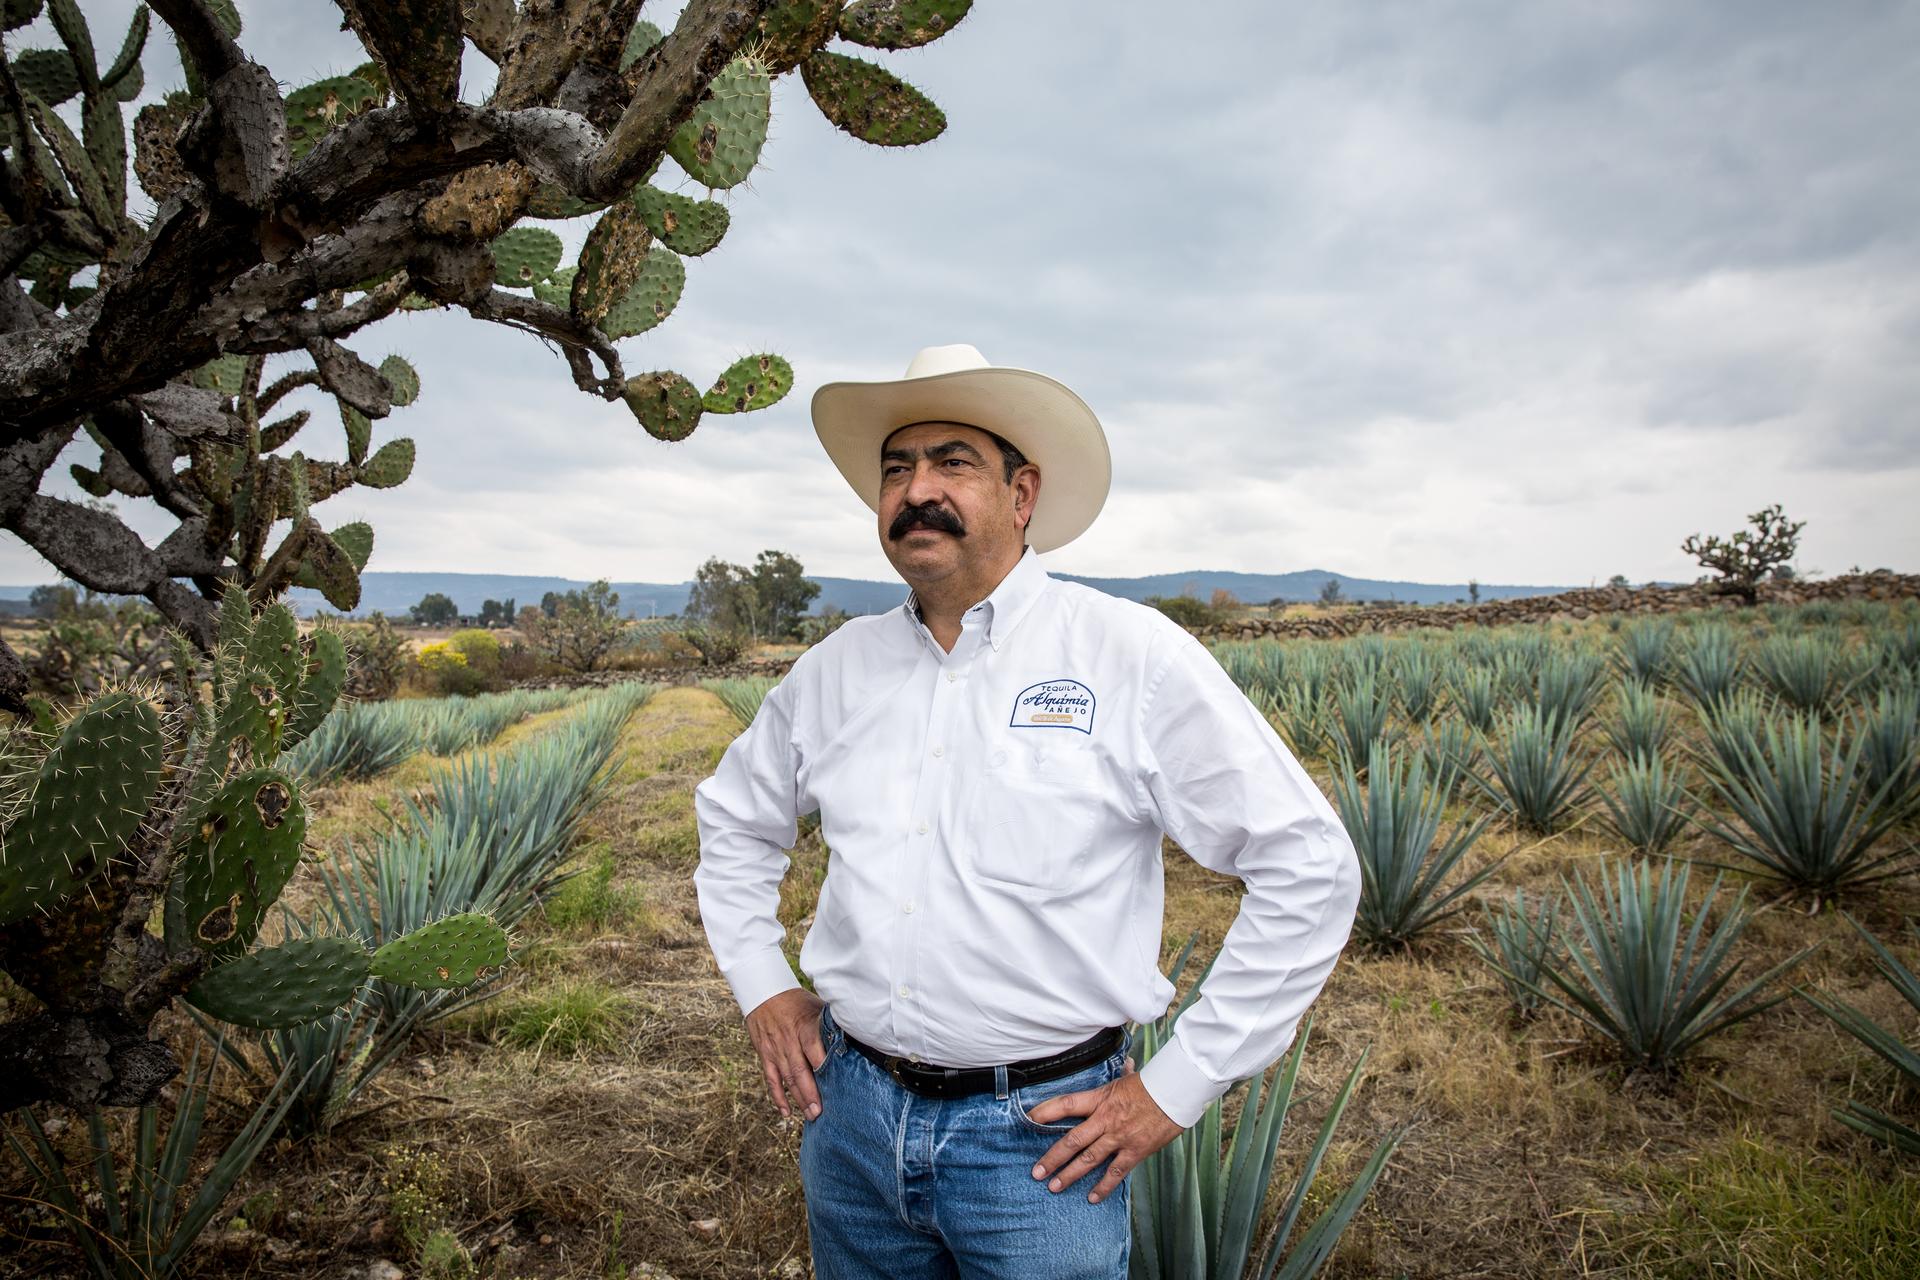 Tequila grower Adolfo Murillo at his agave fields near the village of Agua Negra in Jalisco, Mexico. 